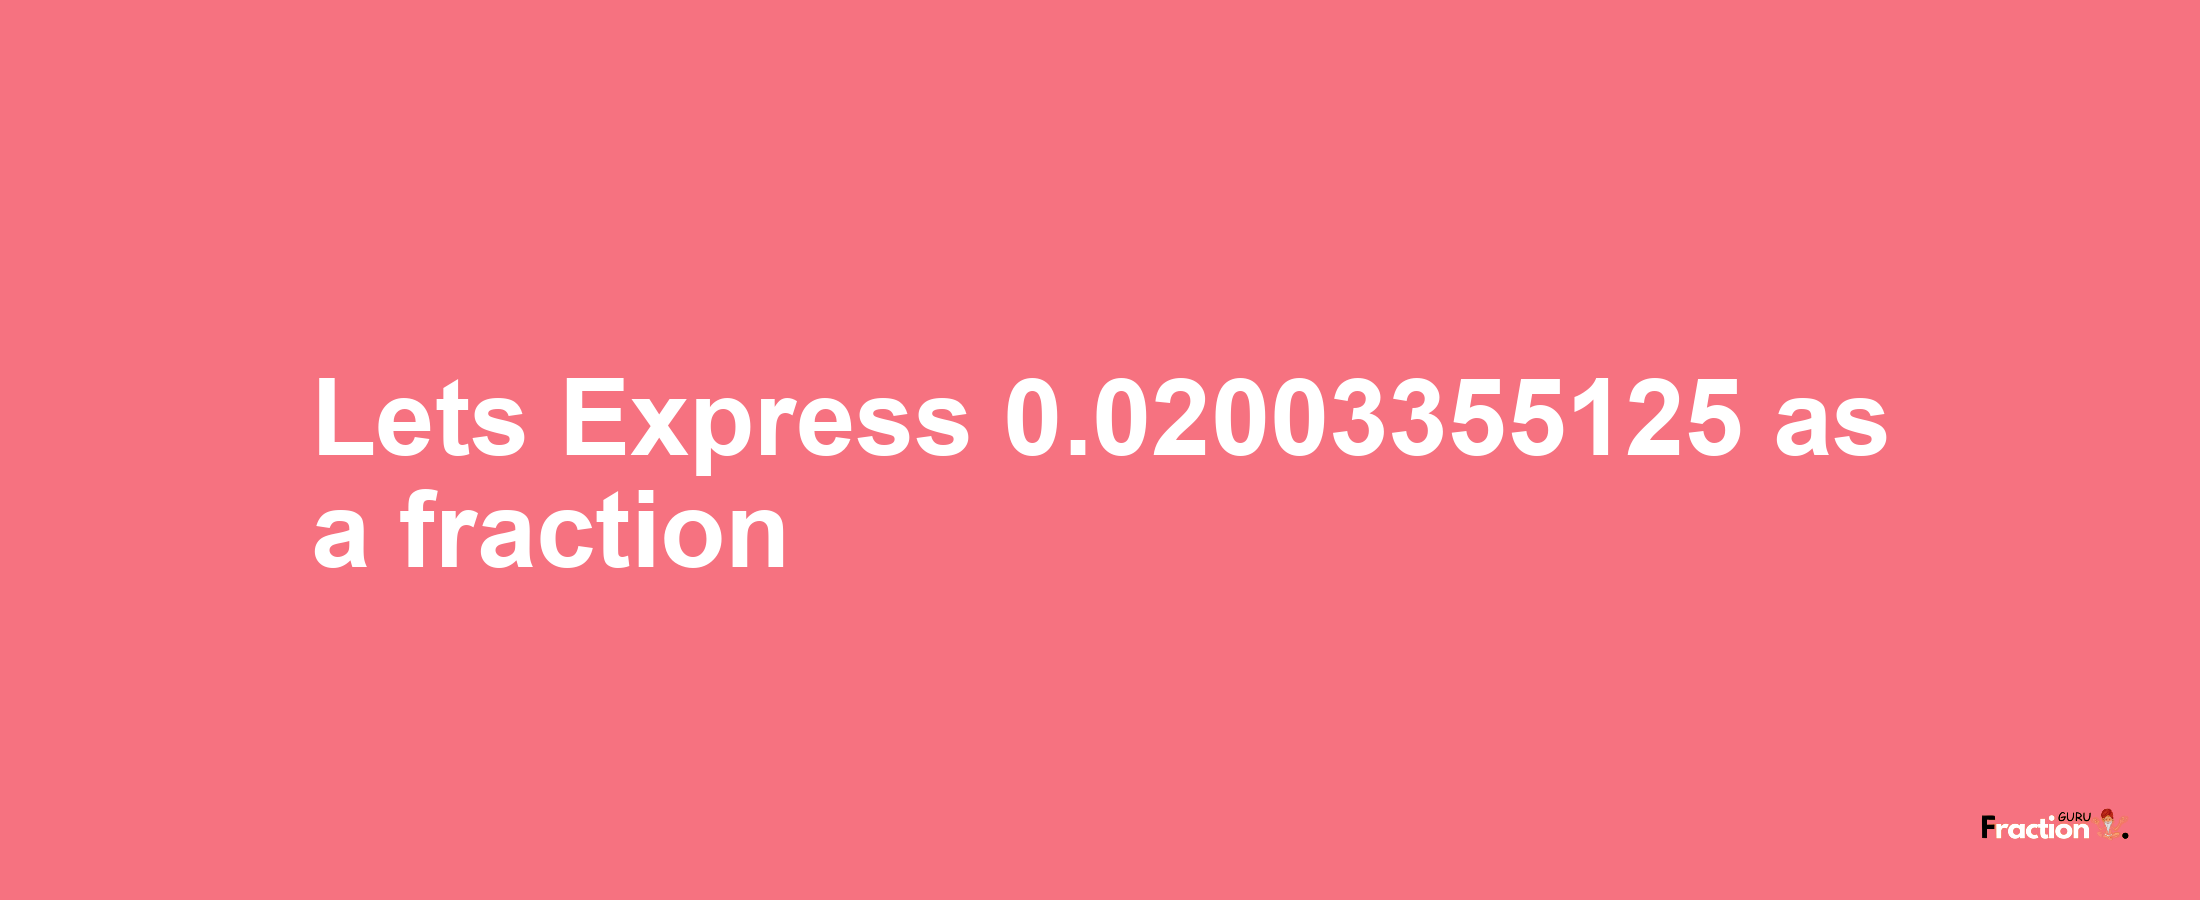 Lets Express 0.02003355125 as afraction